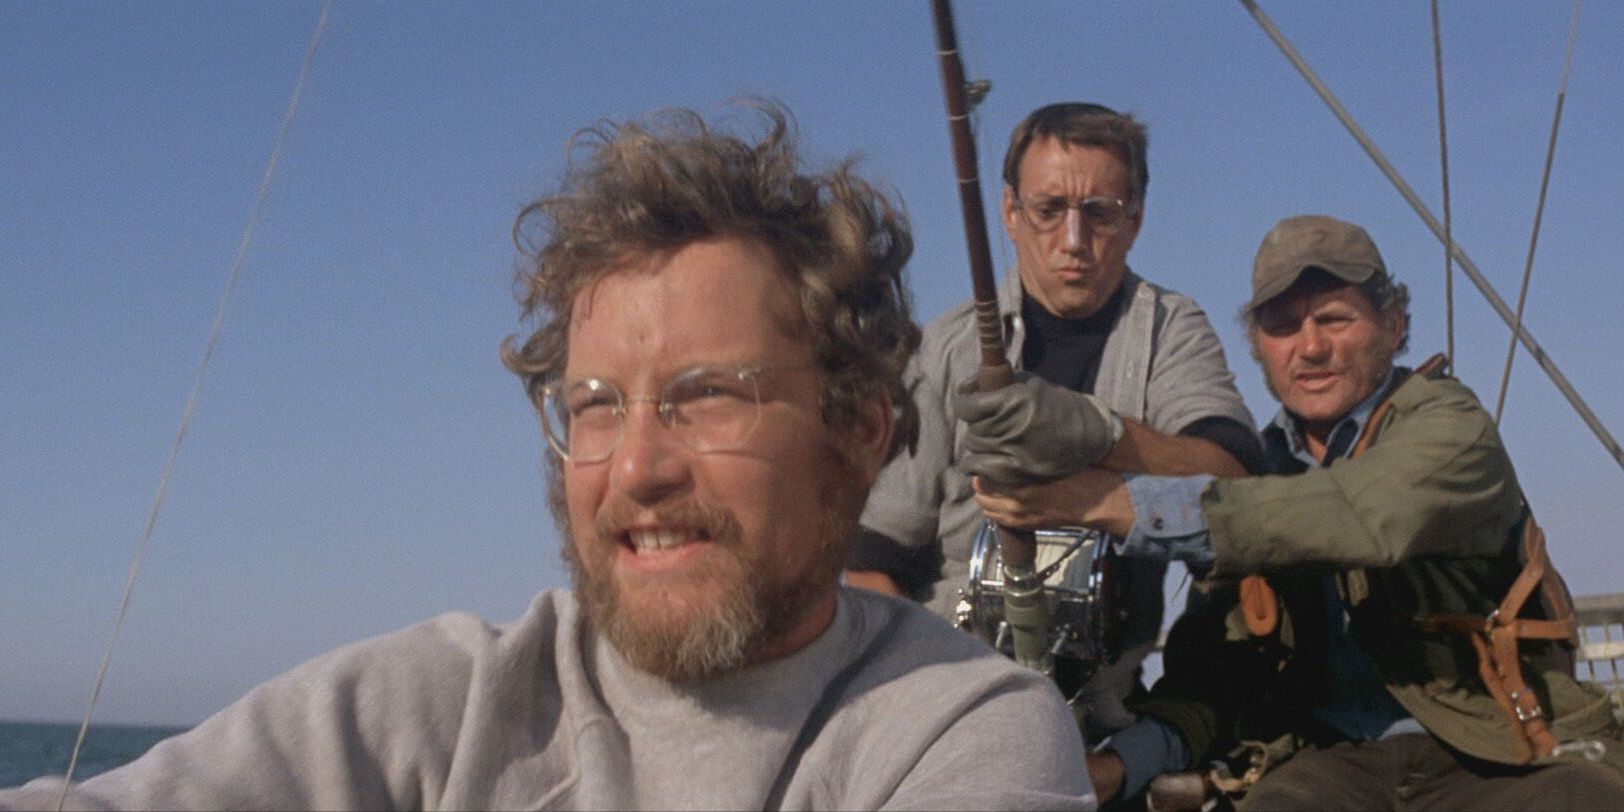 Chief Brody, Quint, and Matt Hooper in Jaws